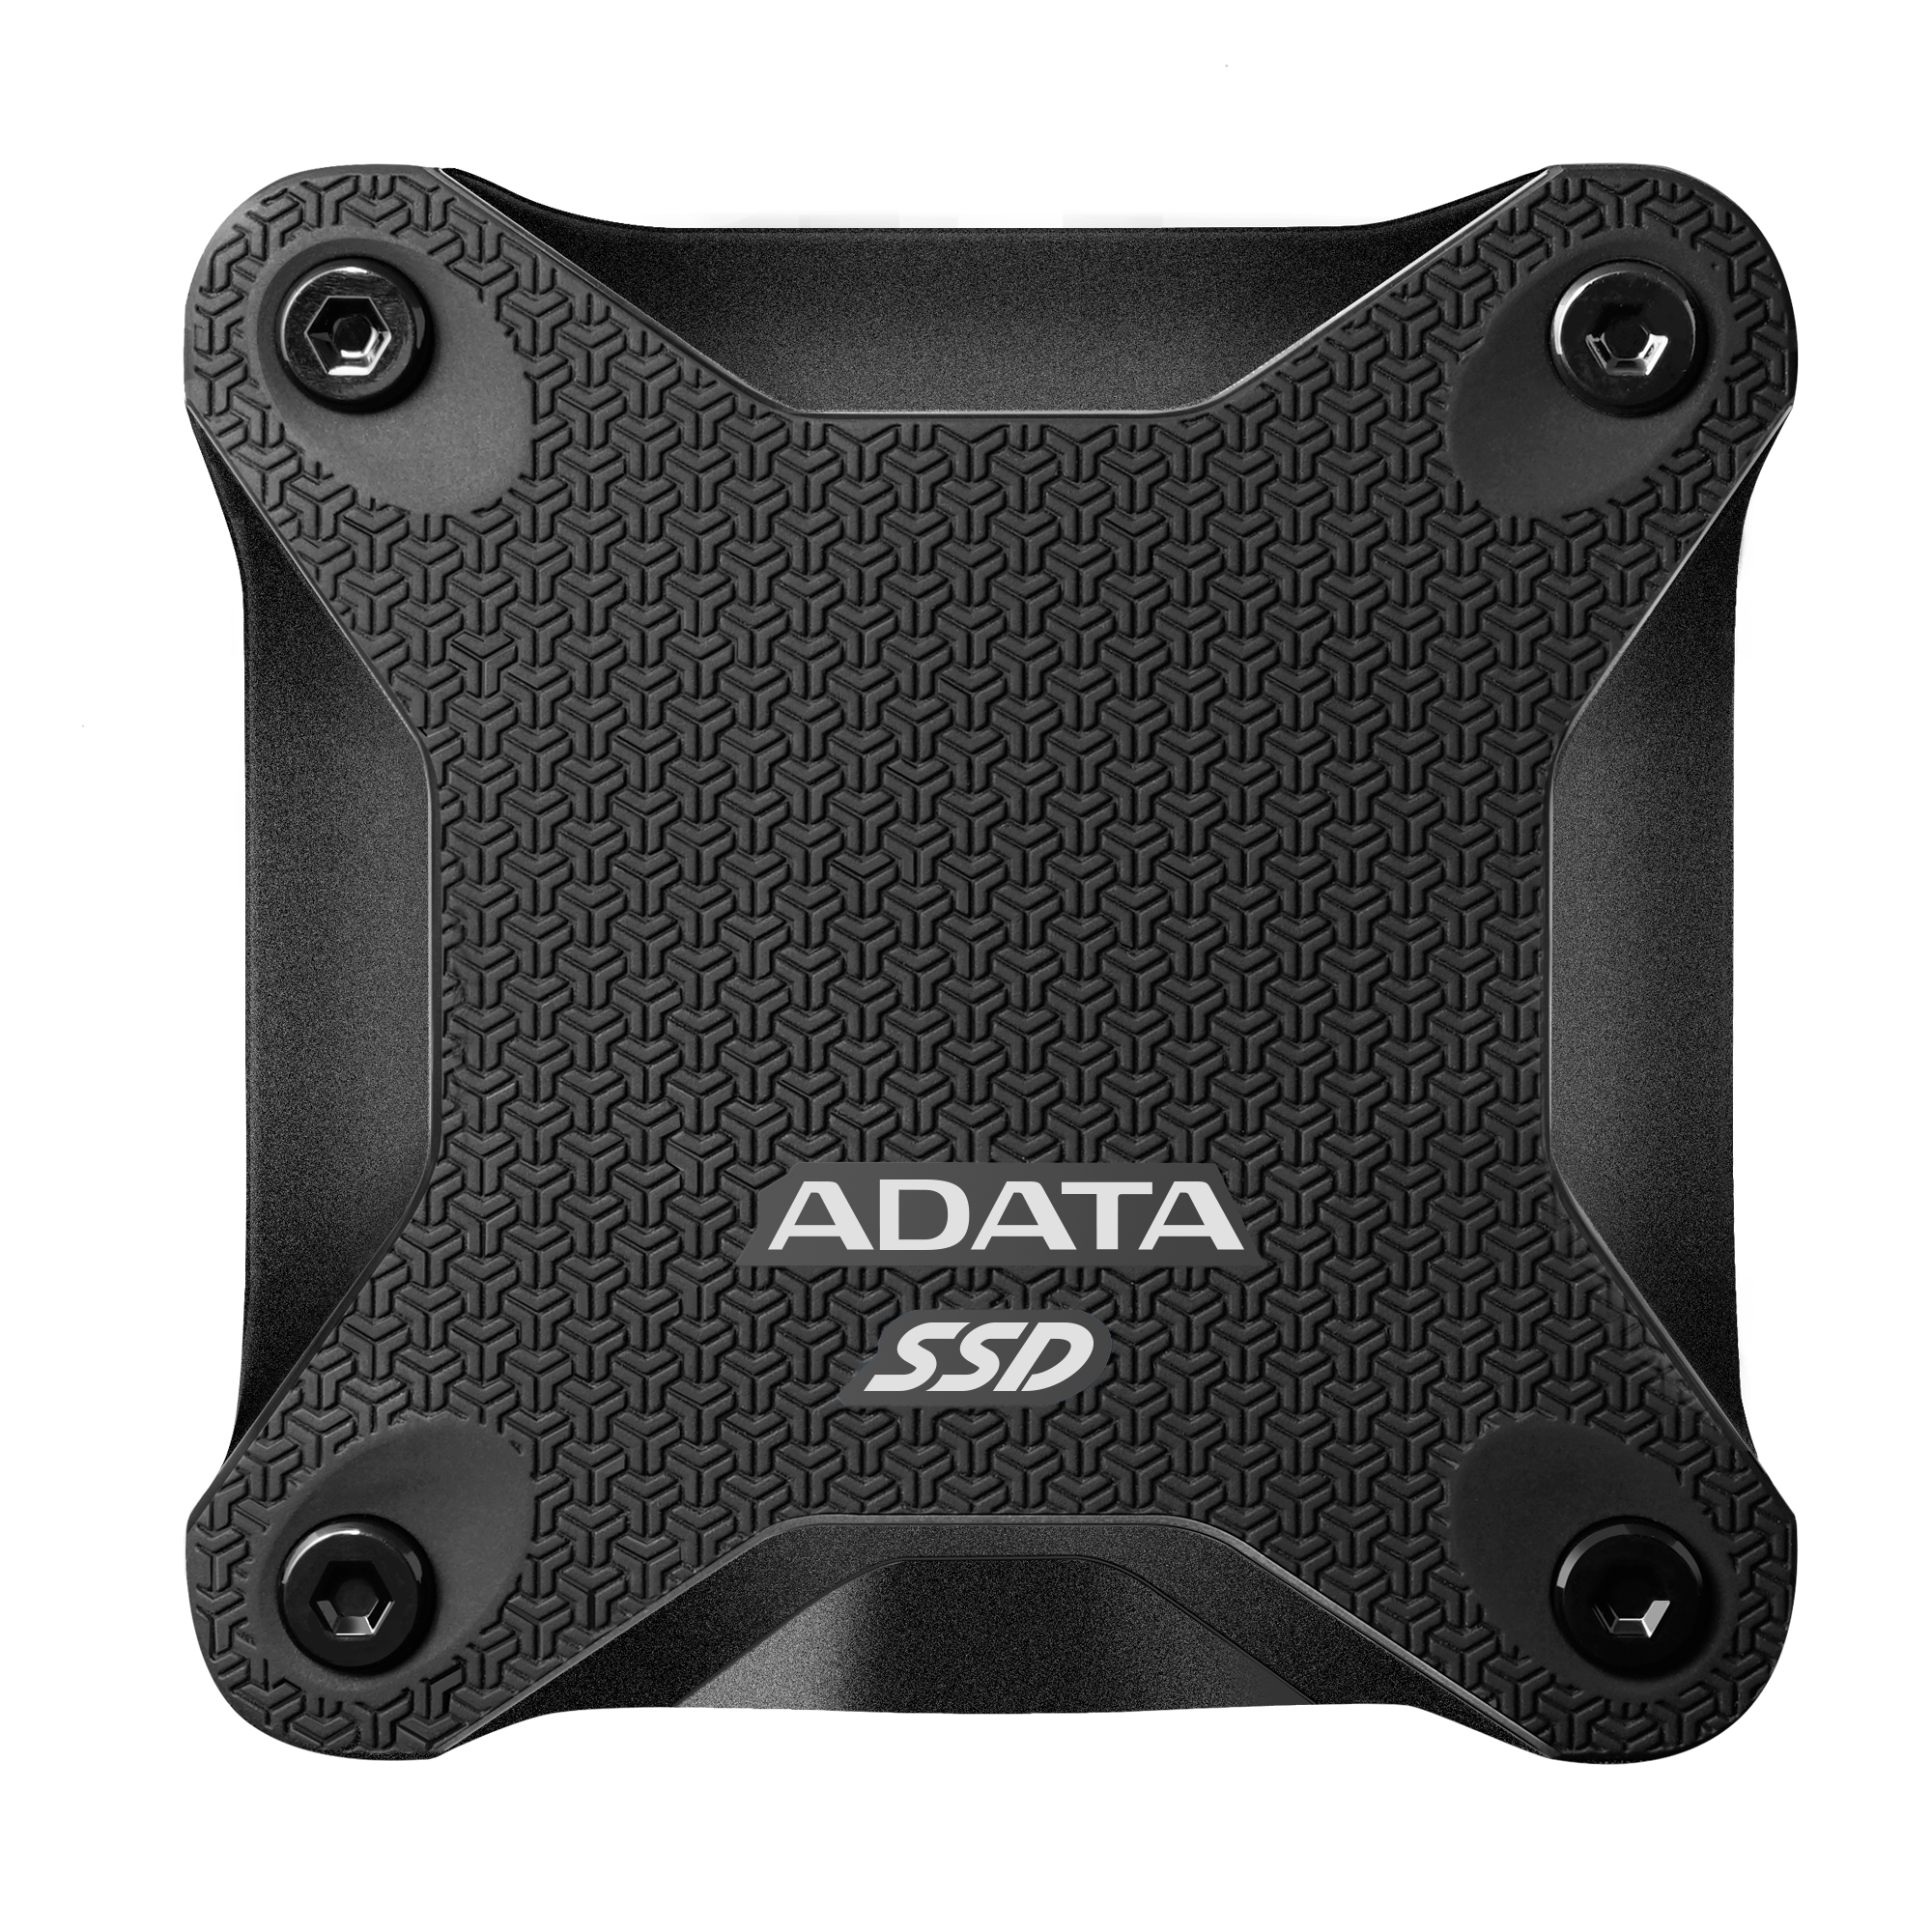 SD620 External Solid State Drive